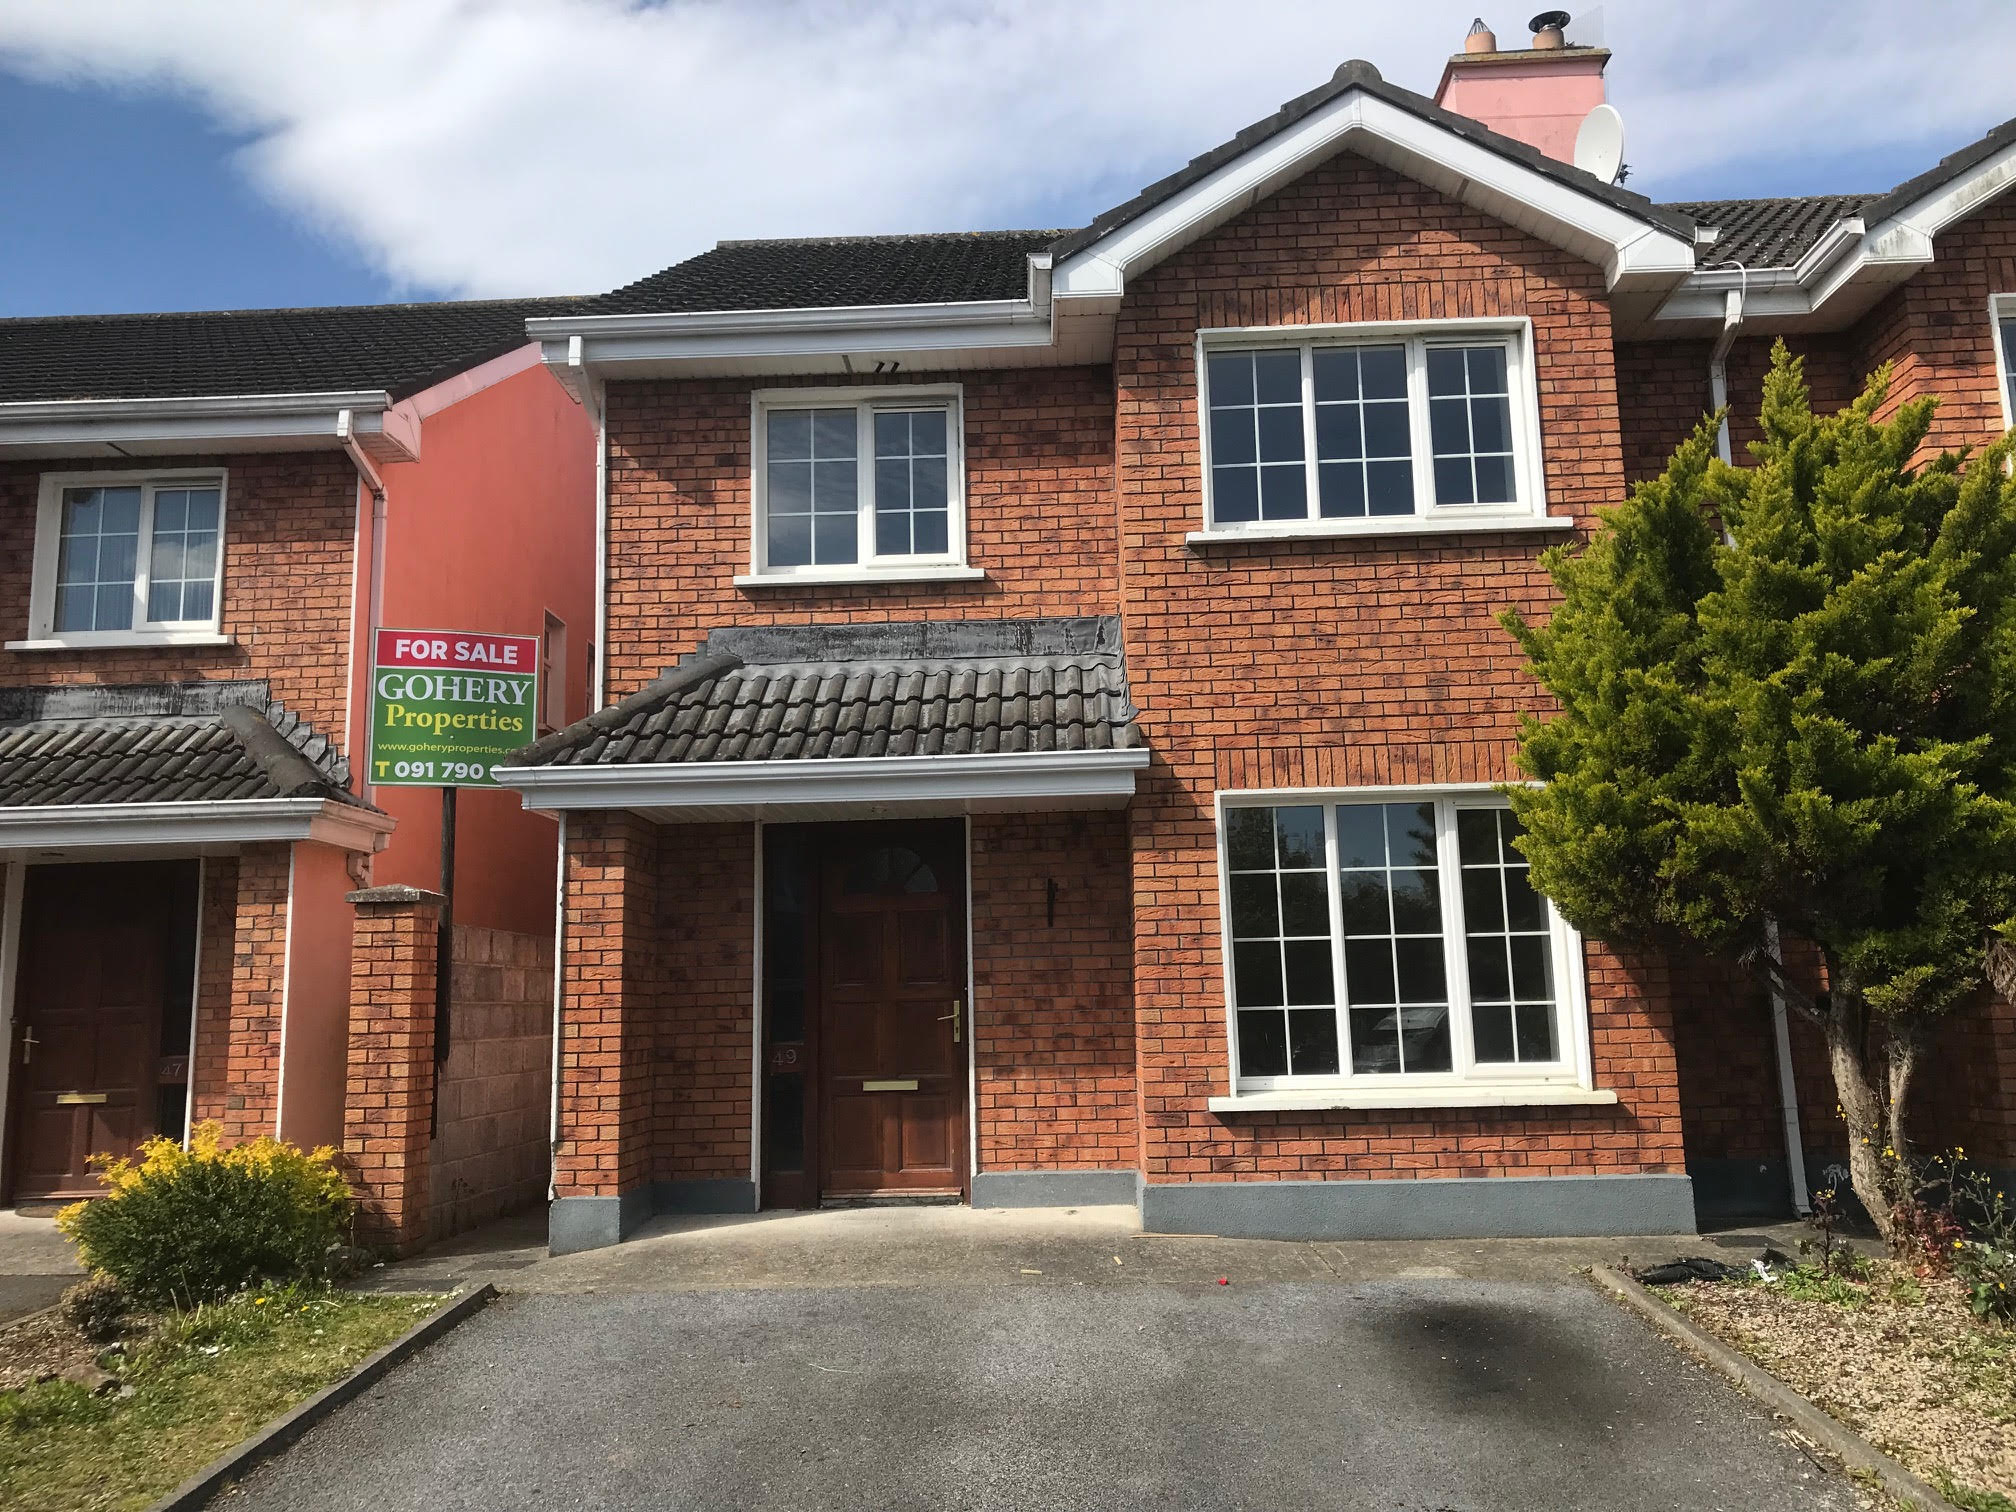 49 Bluebell Woods, Oranmore, Co. Galway